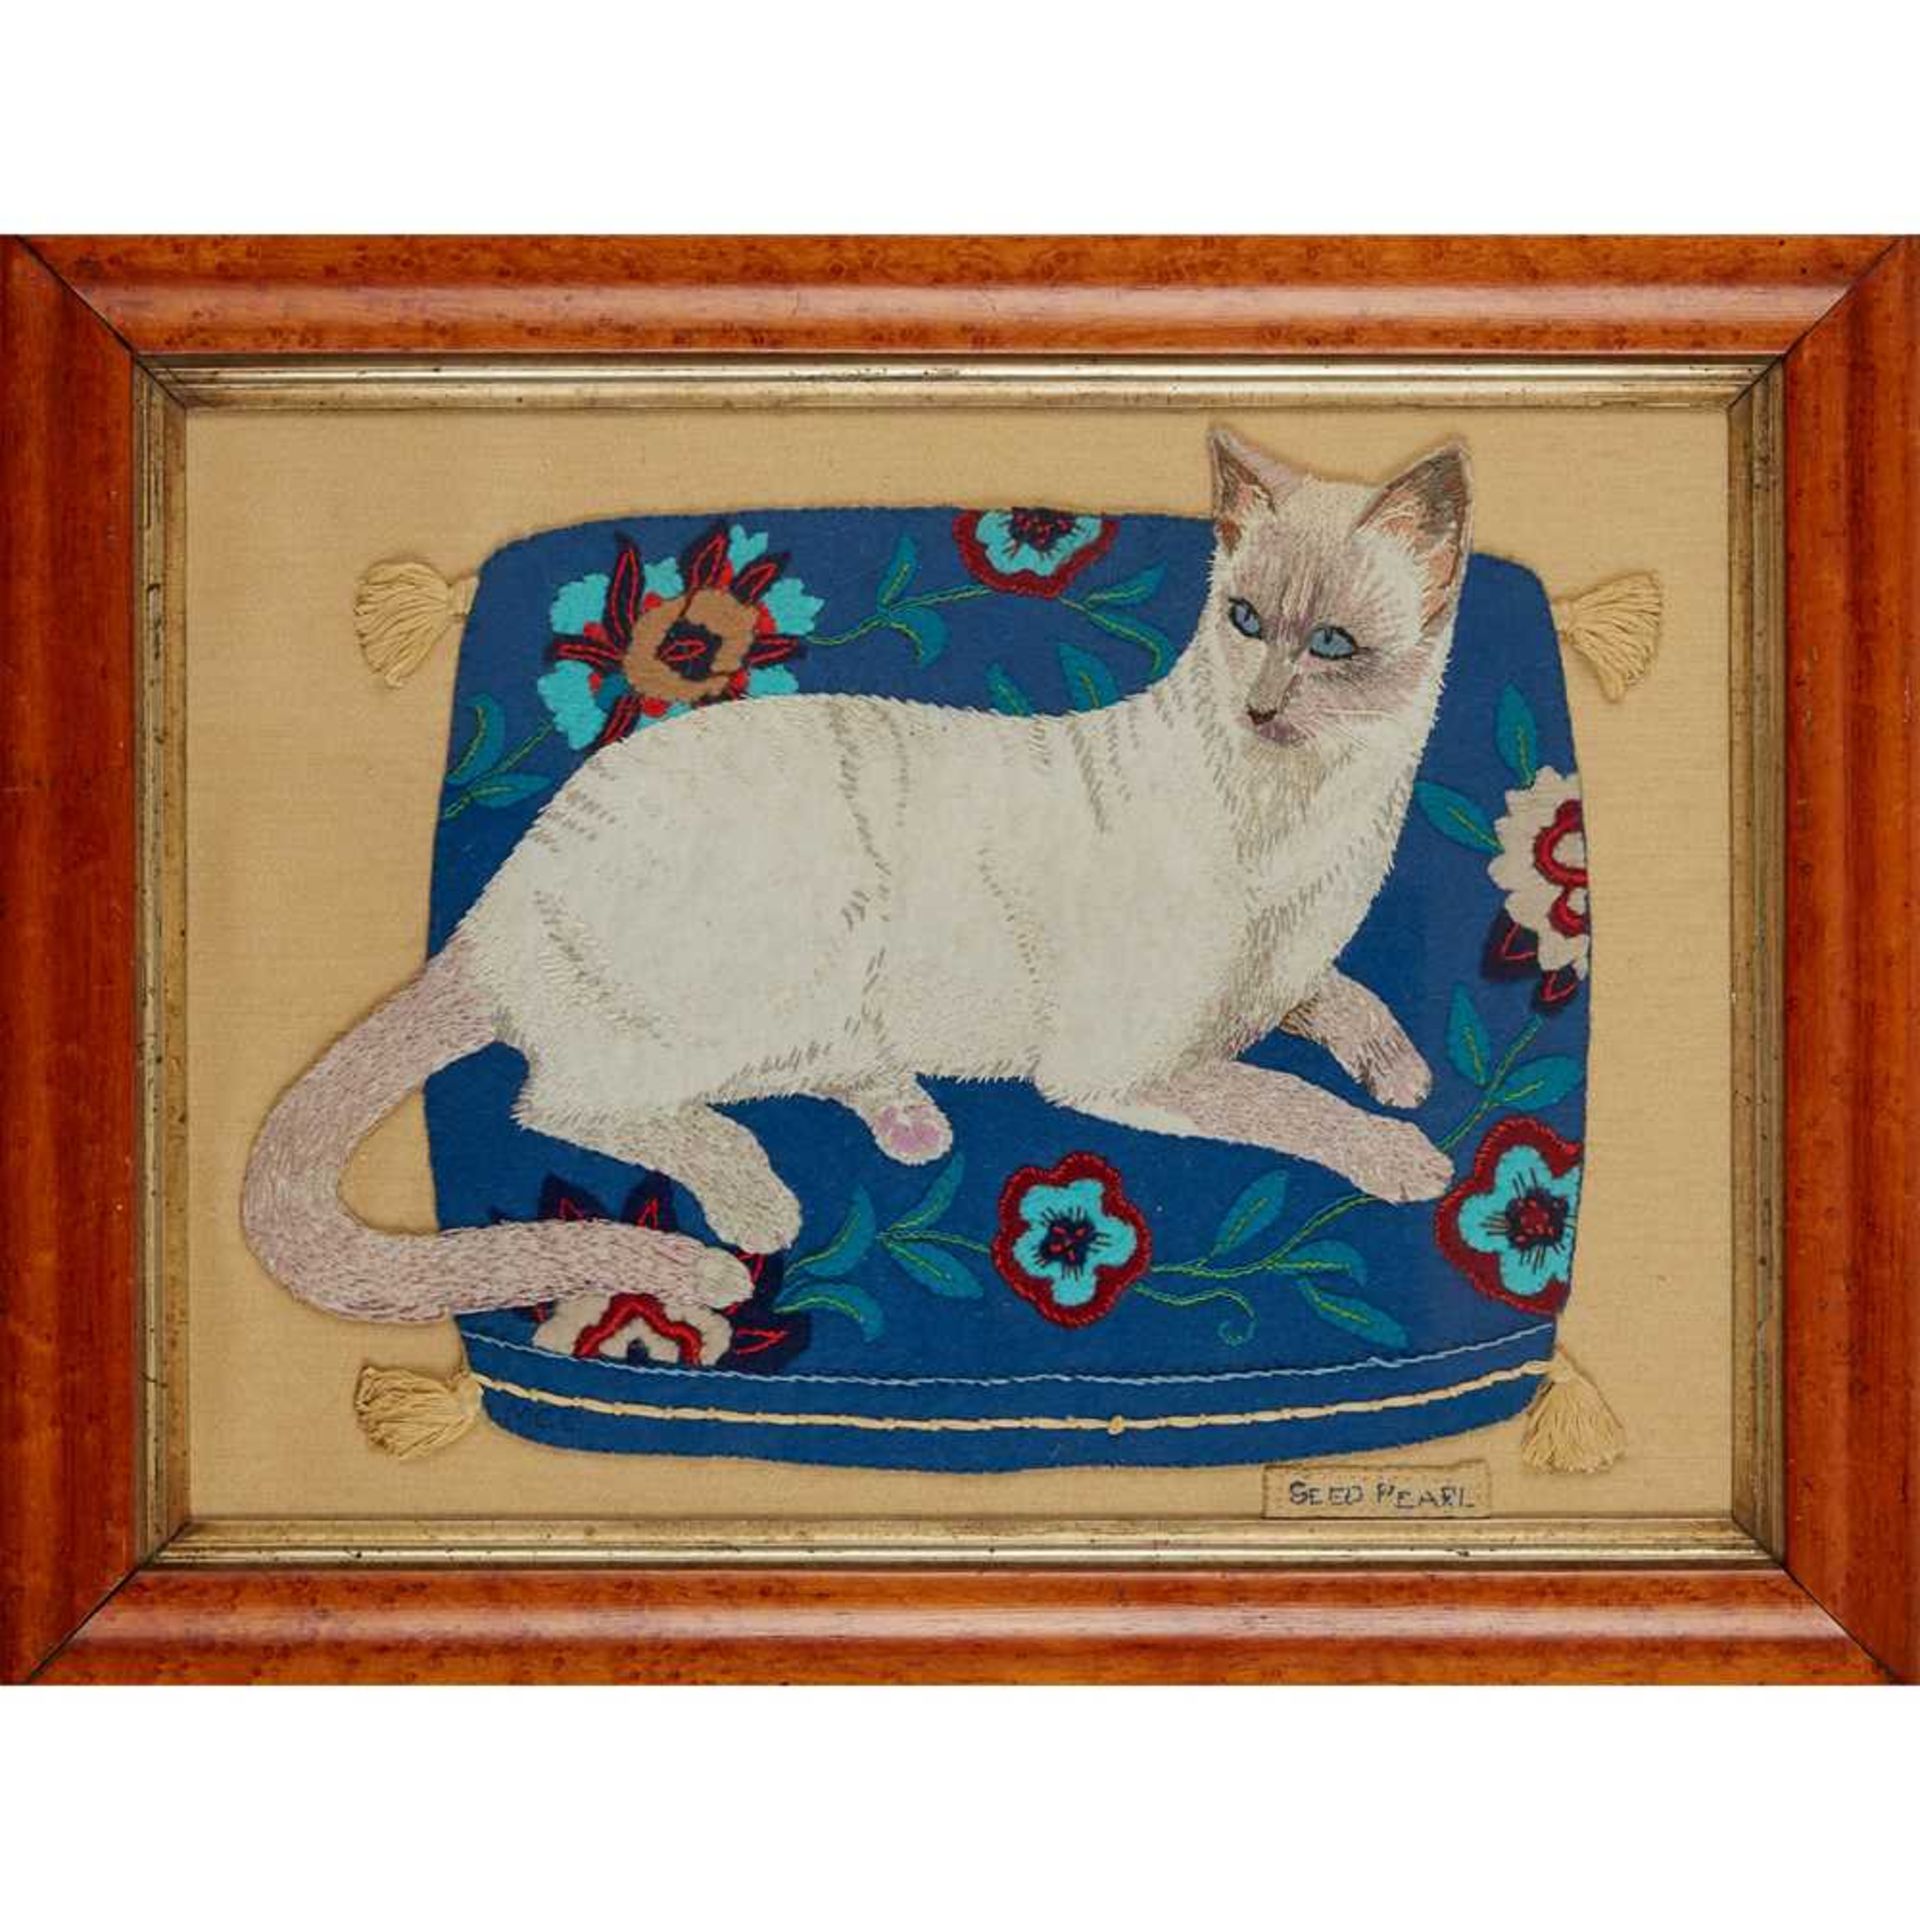 TWO VICTORIAN NEEDLEWORK AND FELT PICTURES OF CATS ON CUSHIONS 19TH CENTURY - Image 2 of 6